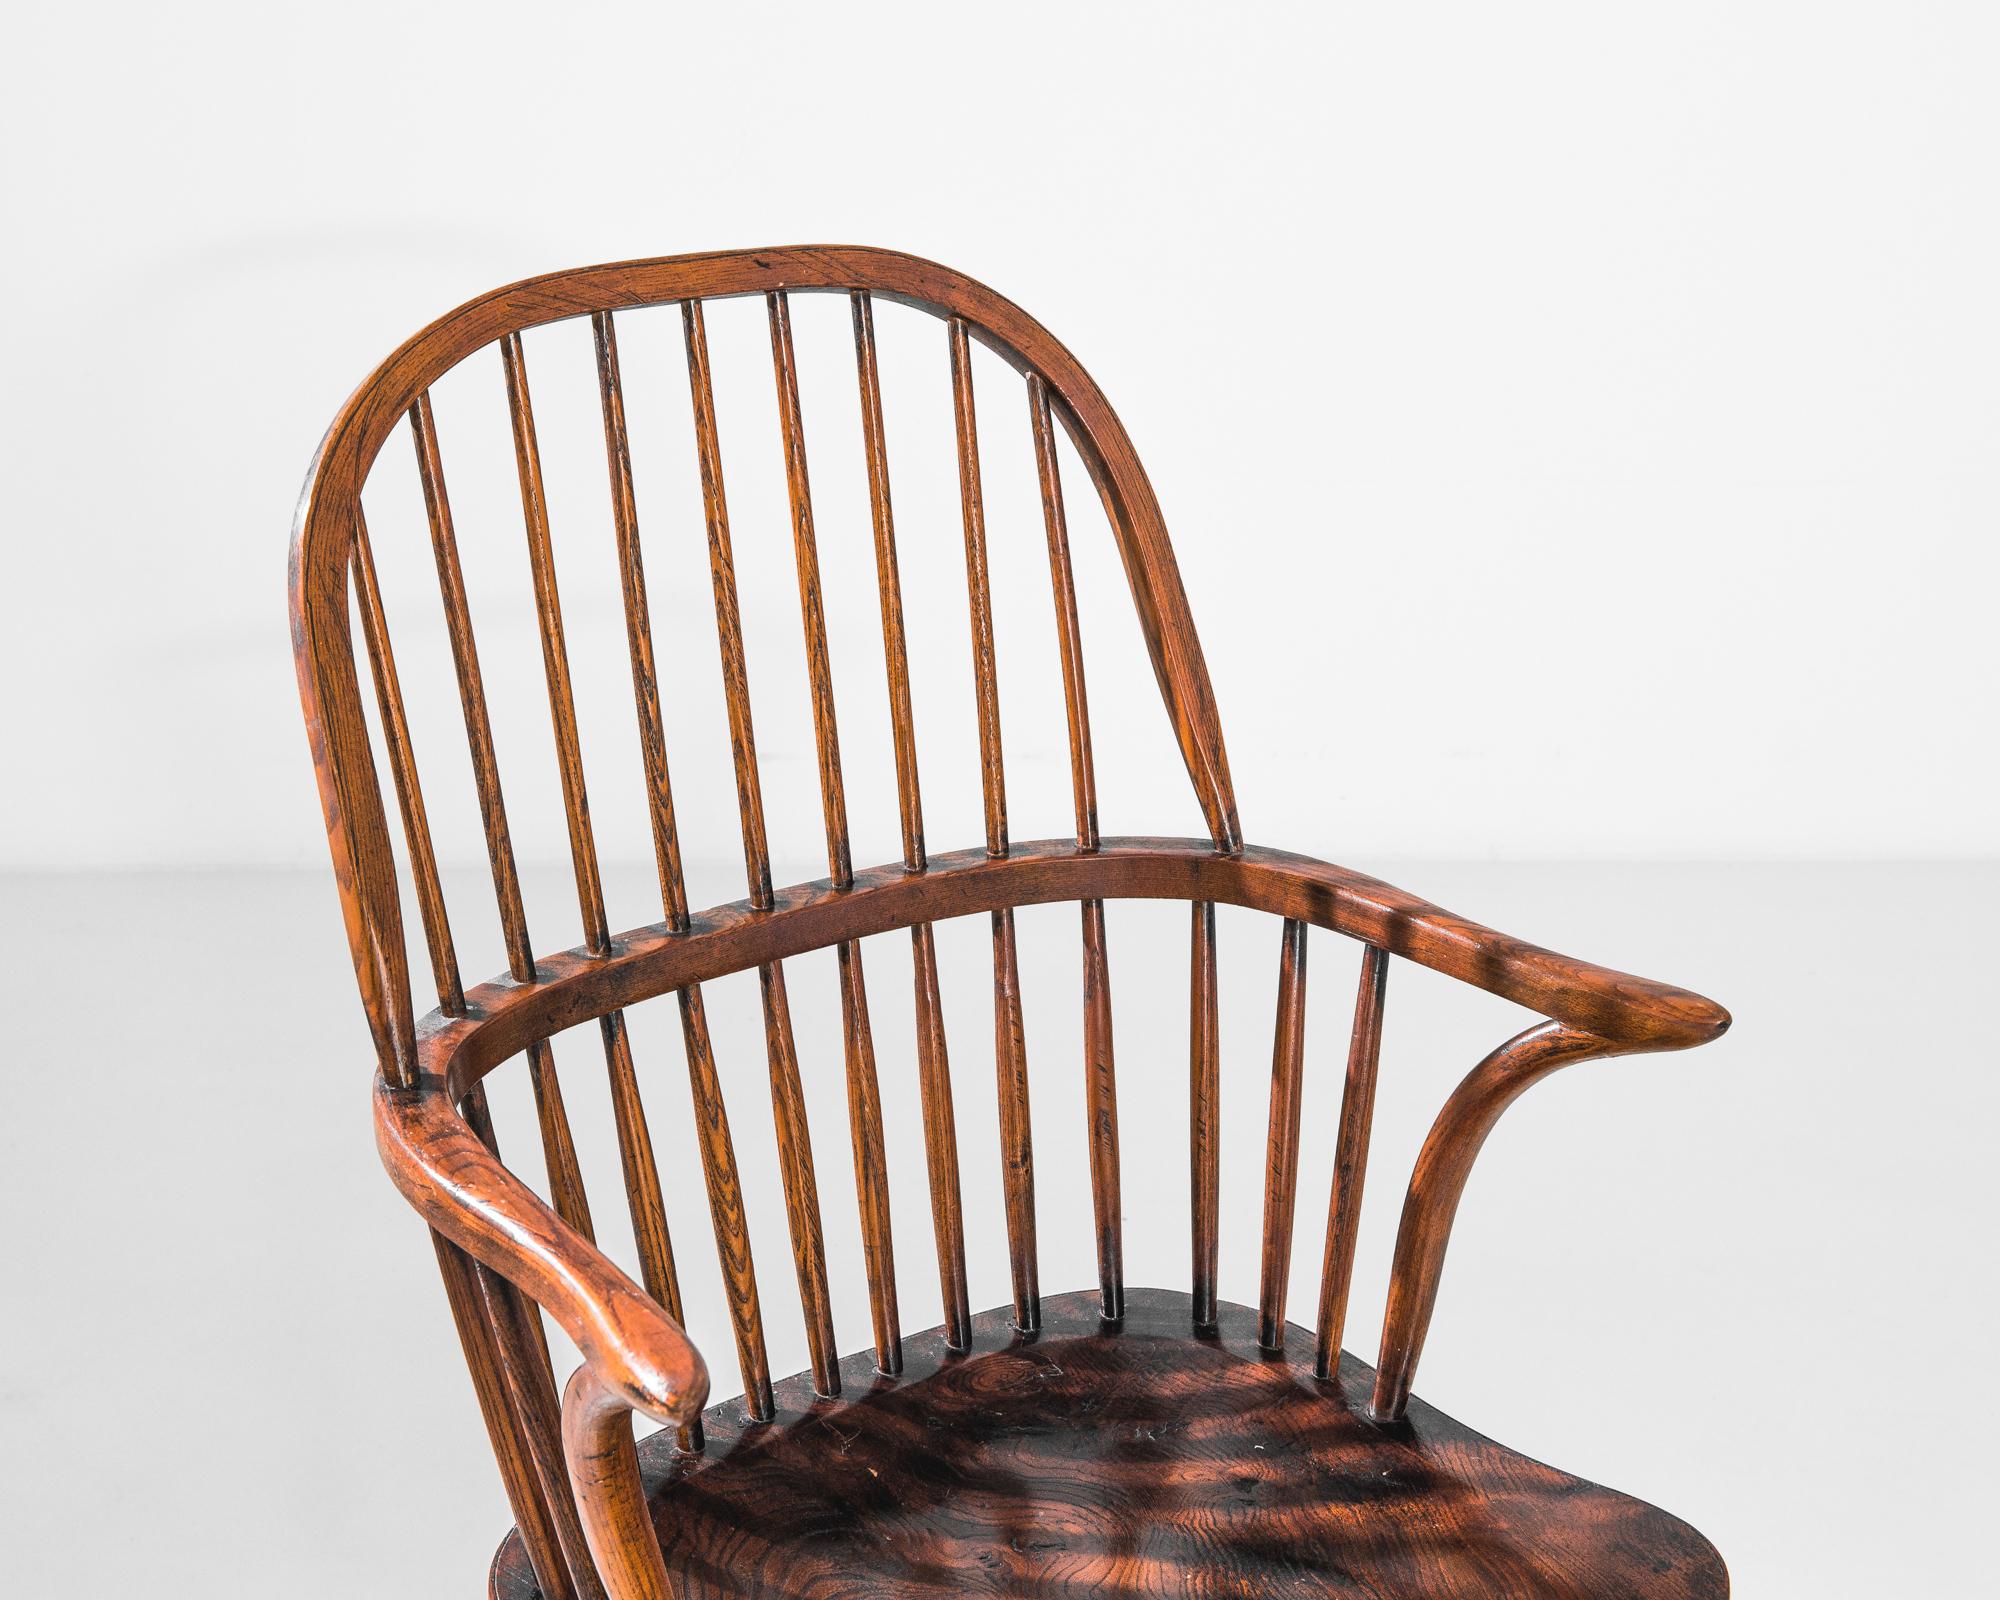 A wooden armchair from 1850s Britain. The windsor chair design lifts elements from traditional farmhouse chairs — the turned legs, contoured seat and spindled backrest — and recombines them into a visually striking yet homey form. The arch of the